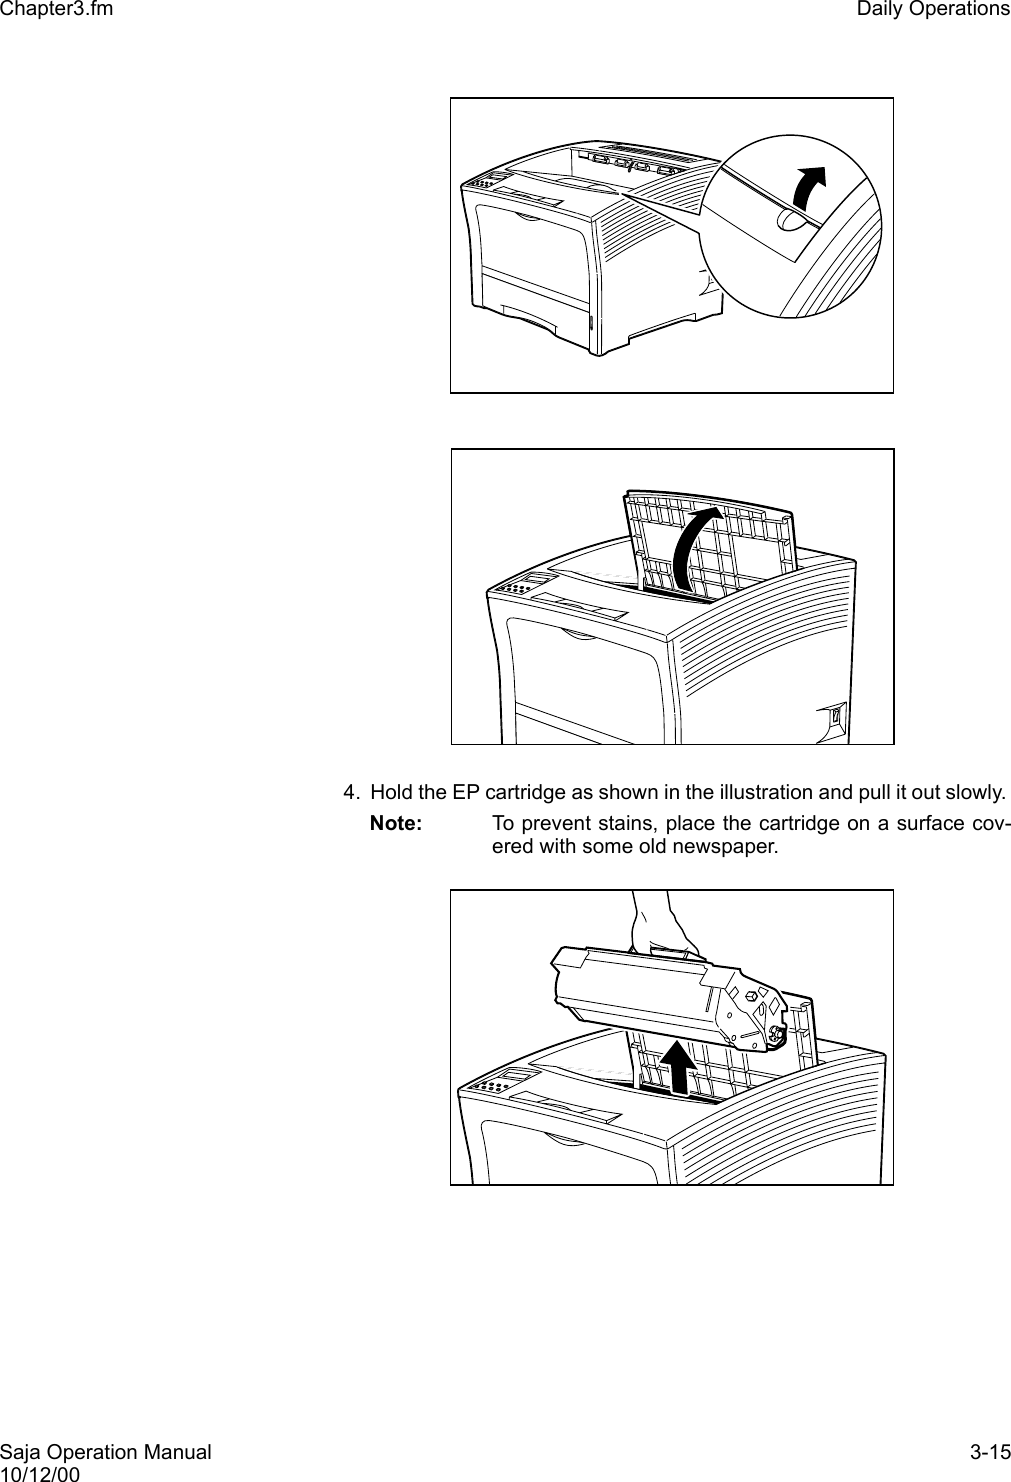 Saja Operation Manual 3-1510/12/00Chapter3.fm Daily Operations4. Hold the EP cartridge as shown in the illustration and pull it out slowly. Note: To prevent stains, place the cartridge on a surface cov-ered with some old newspaper. 